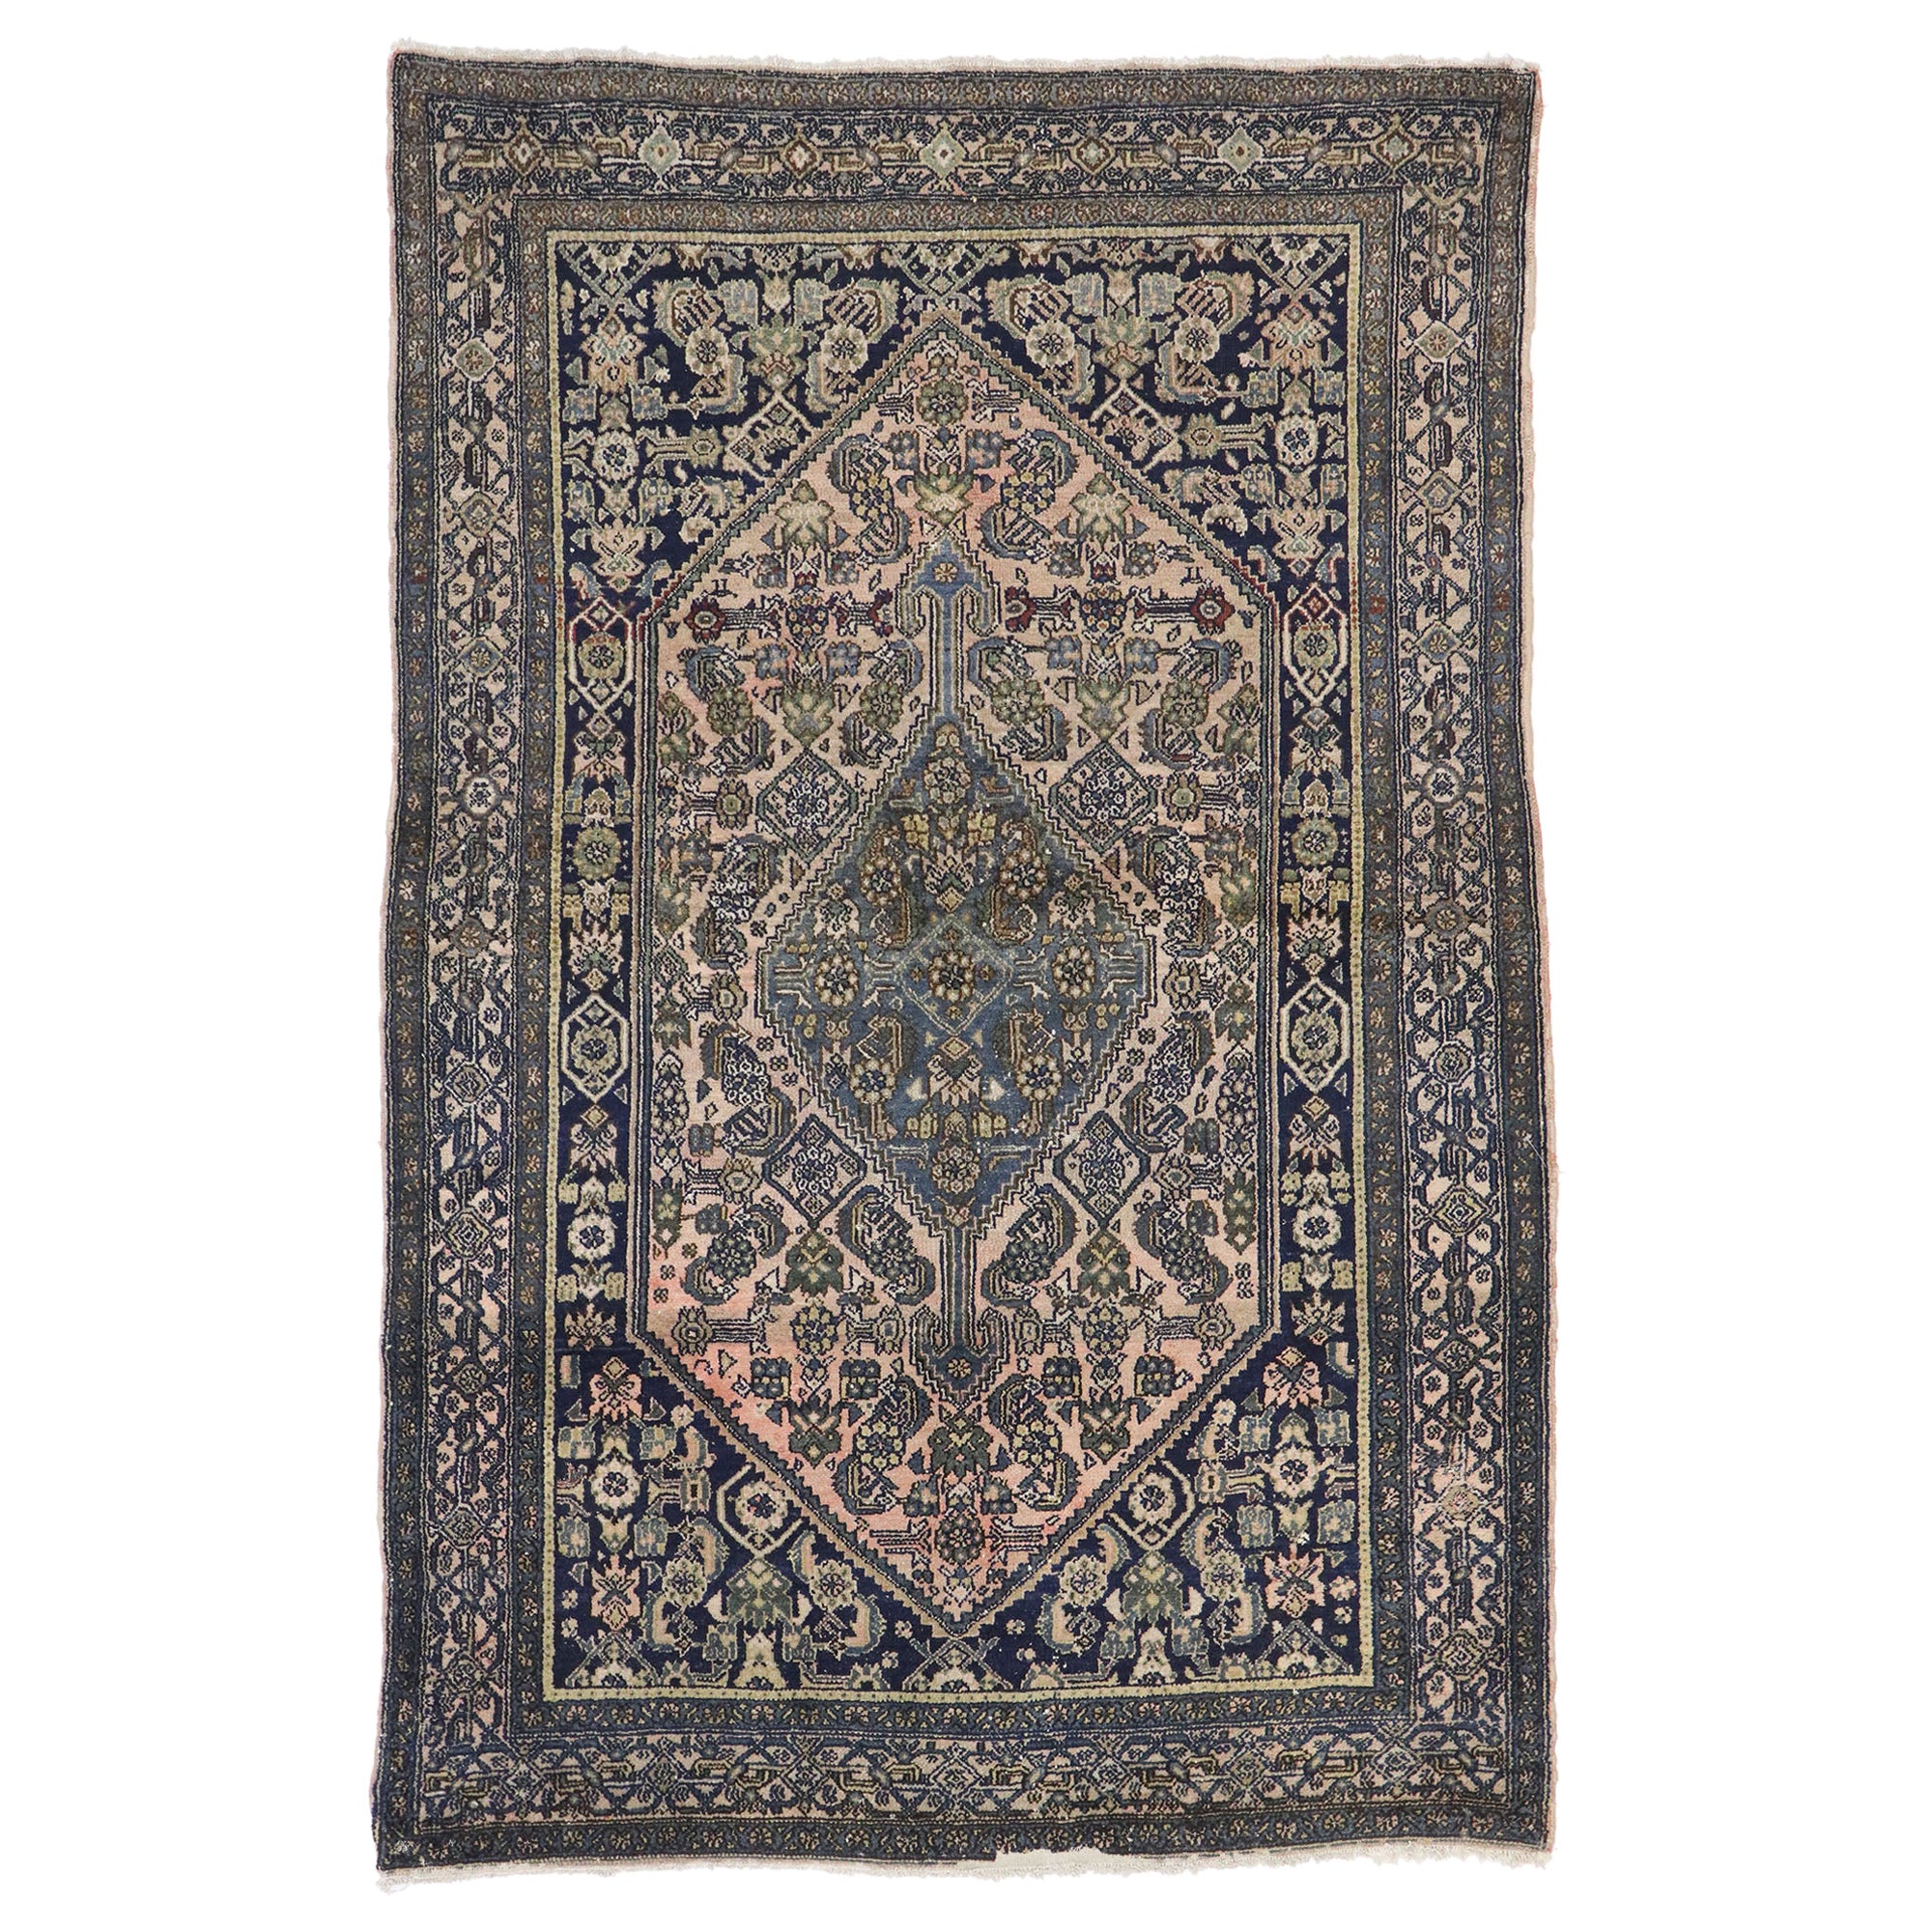 Antique Persian Bibikabad Rug with Victorian Style